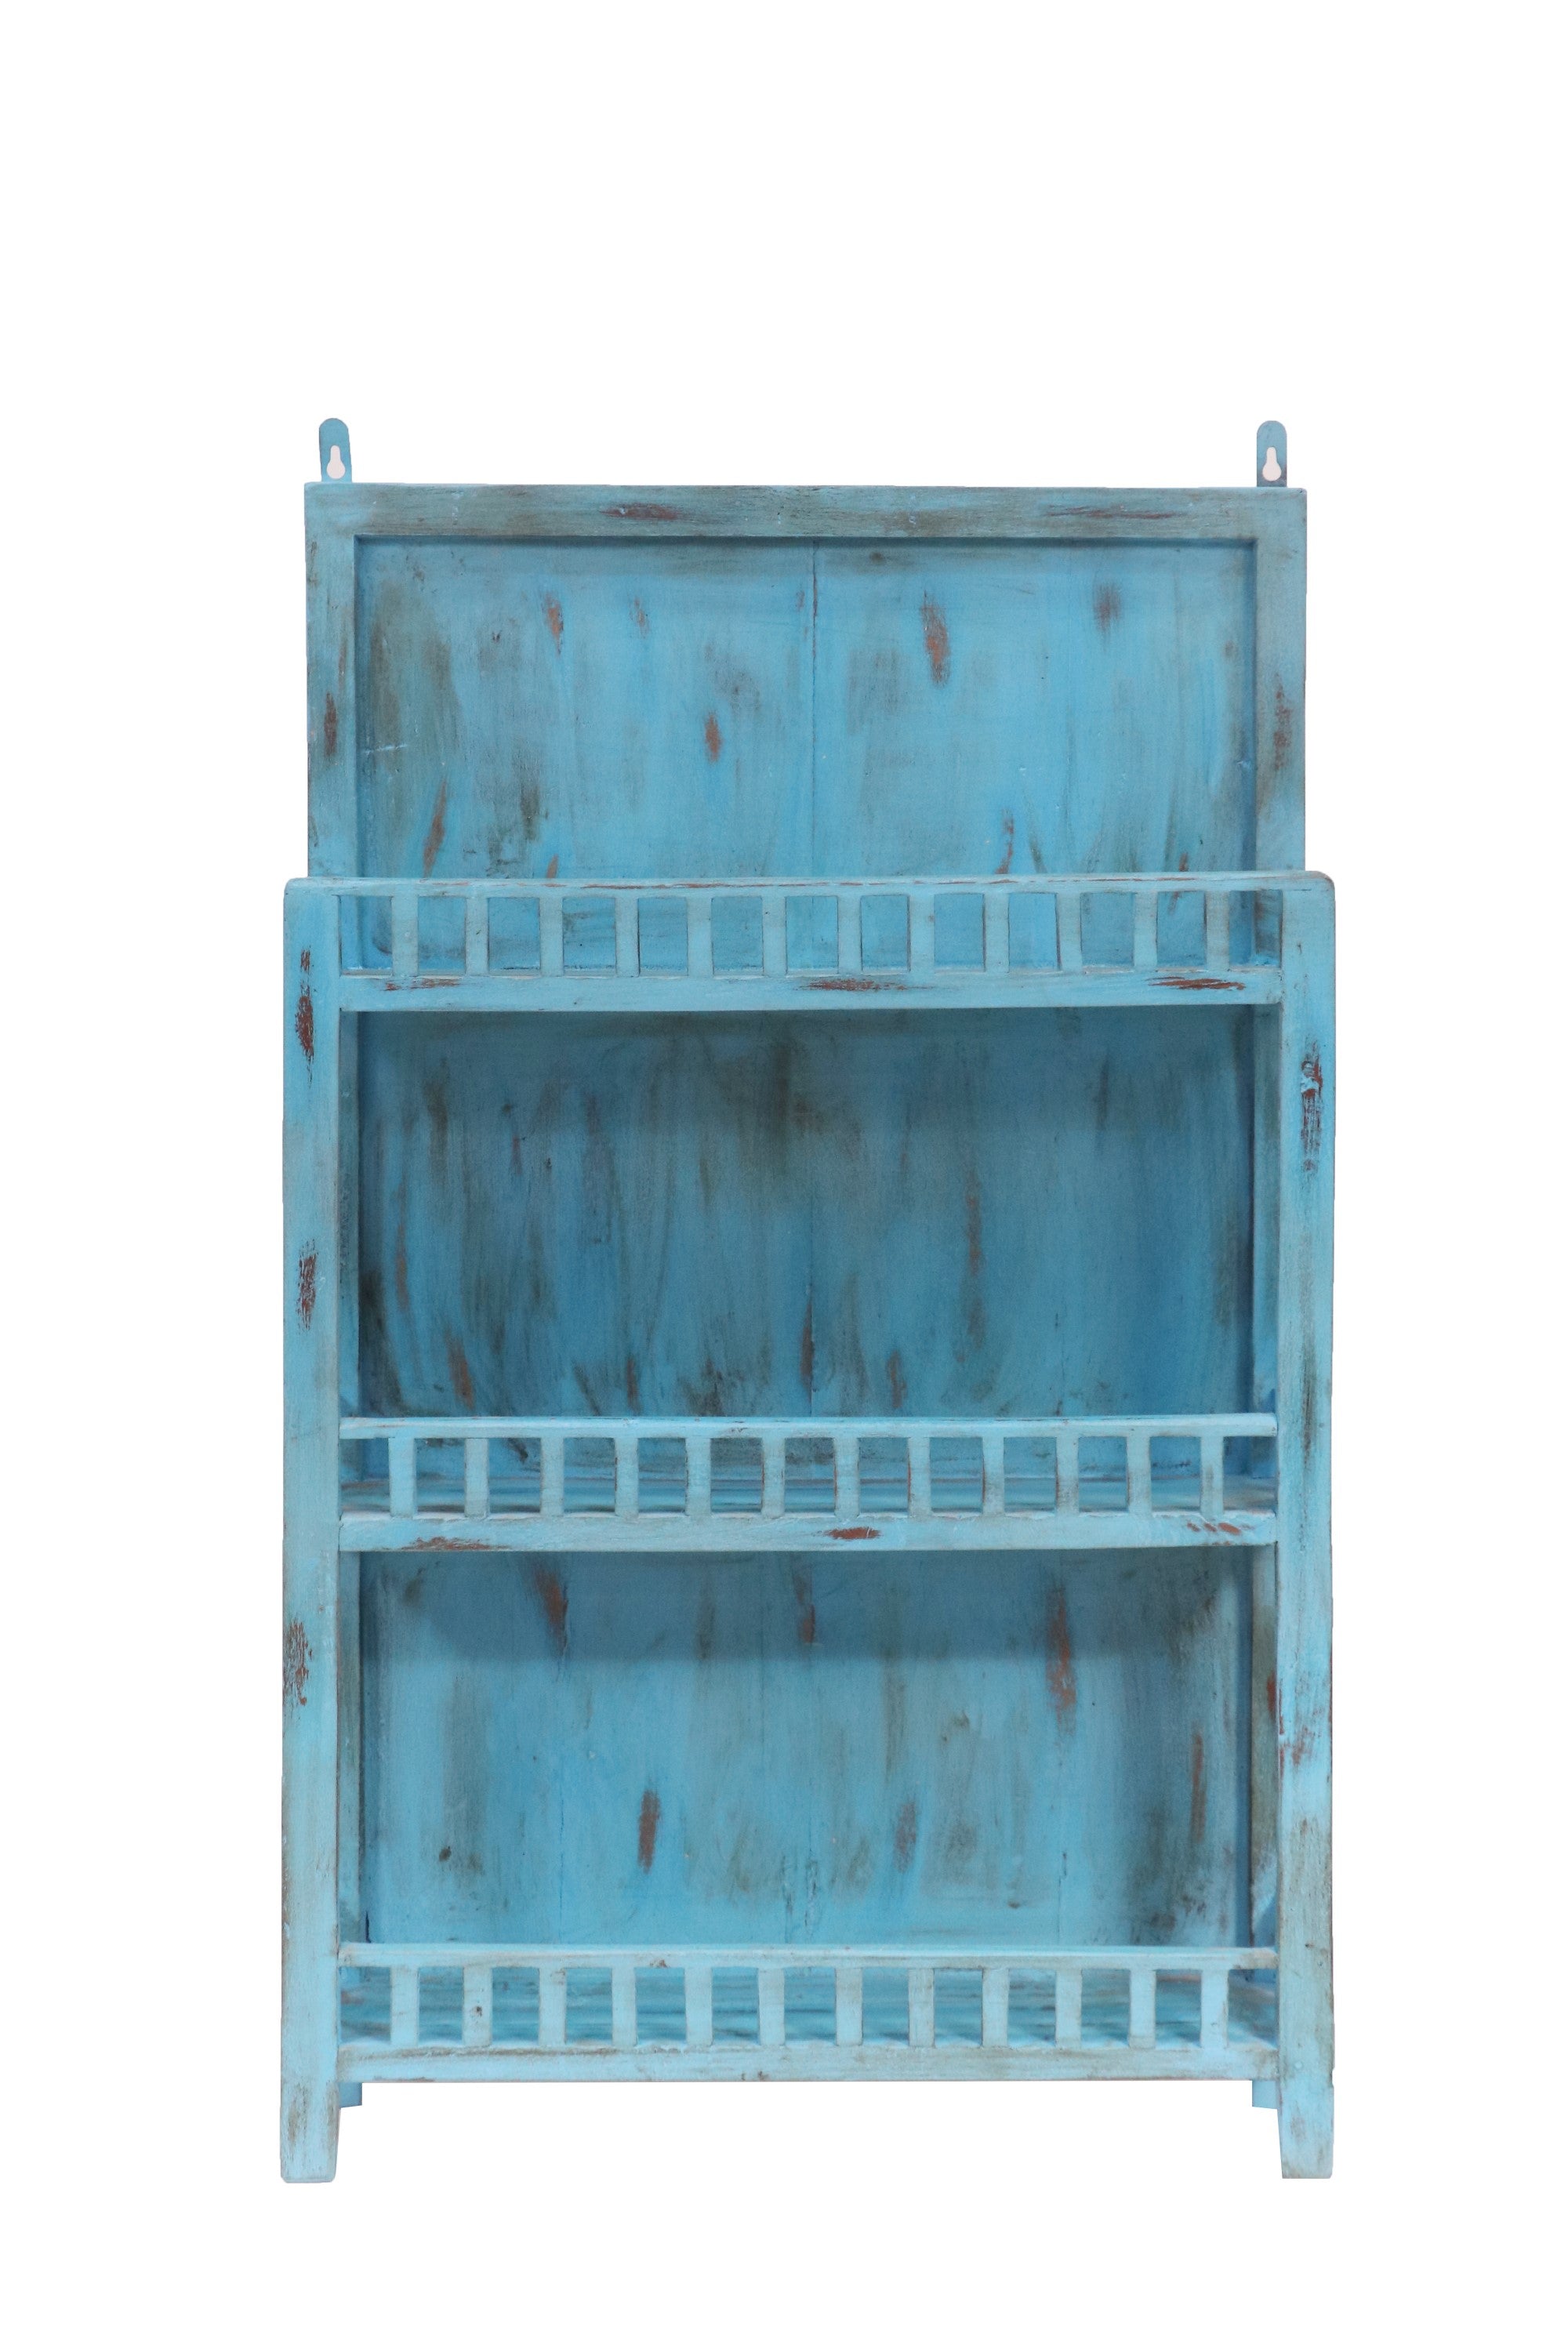 Antique Blue touch wall hanging Solid wood Rack Rack